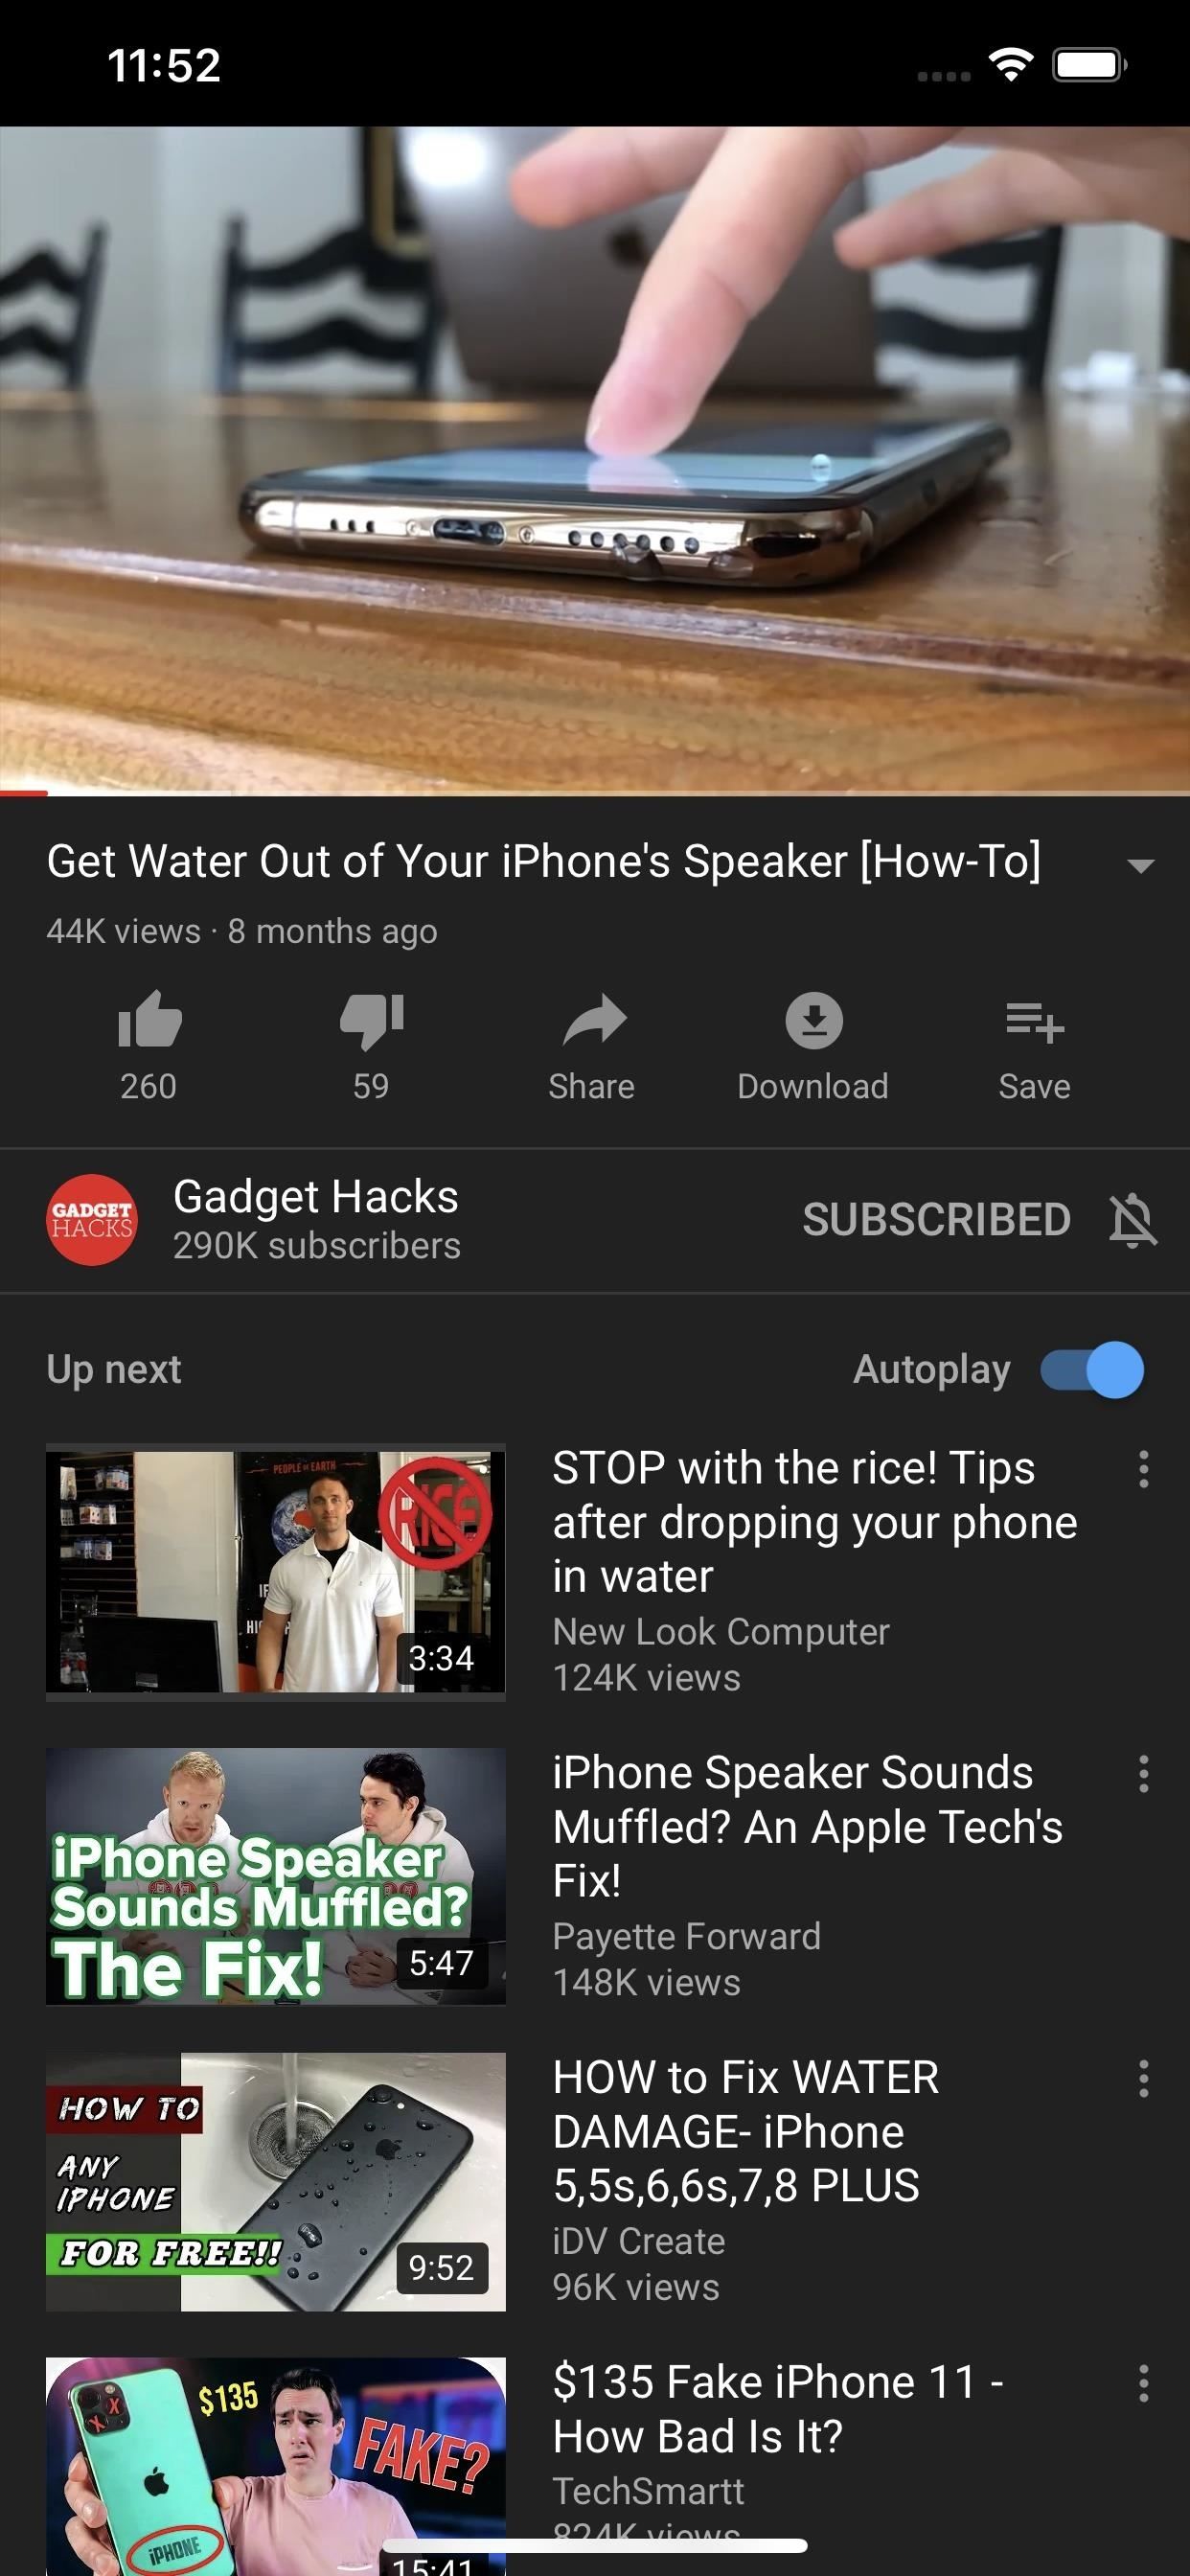 How to Make YouTube Videos Fill the Whole Screen on Any Phone